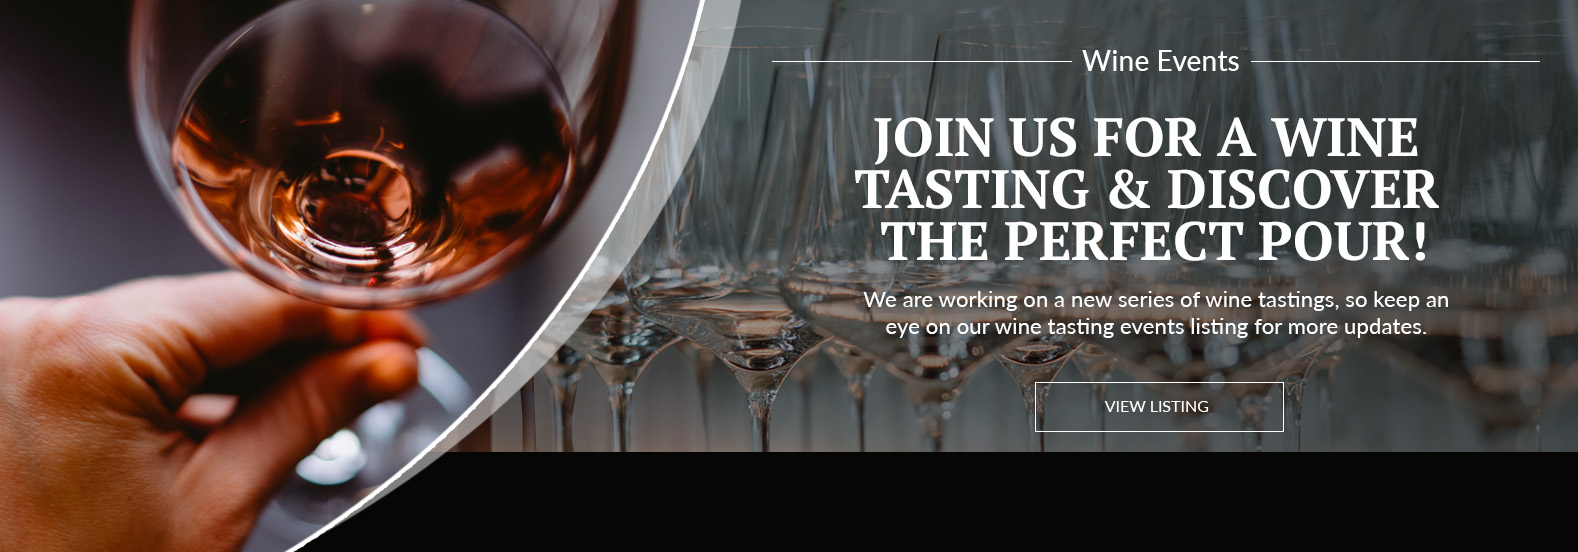 Discover Your Perfect Pour - Upcoming Wine Tastings